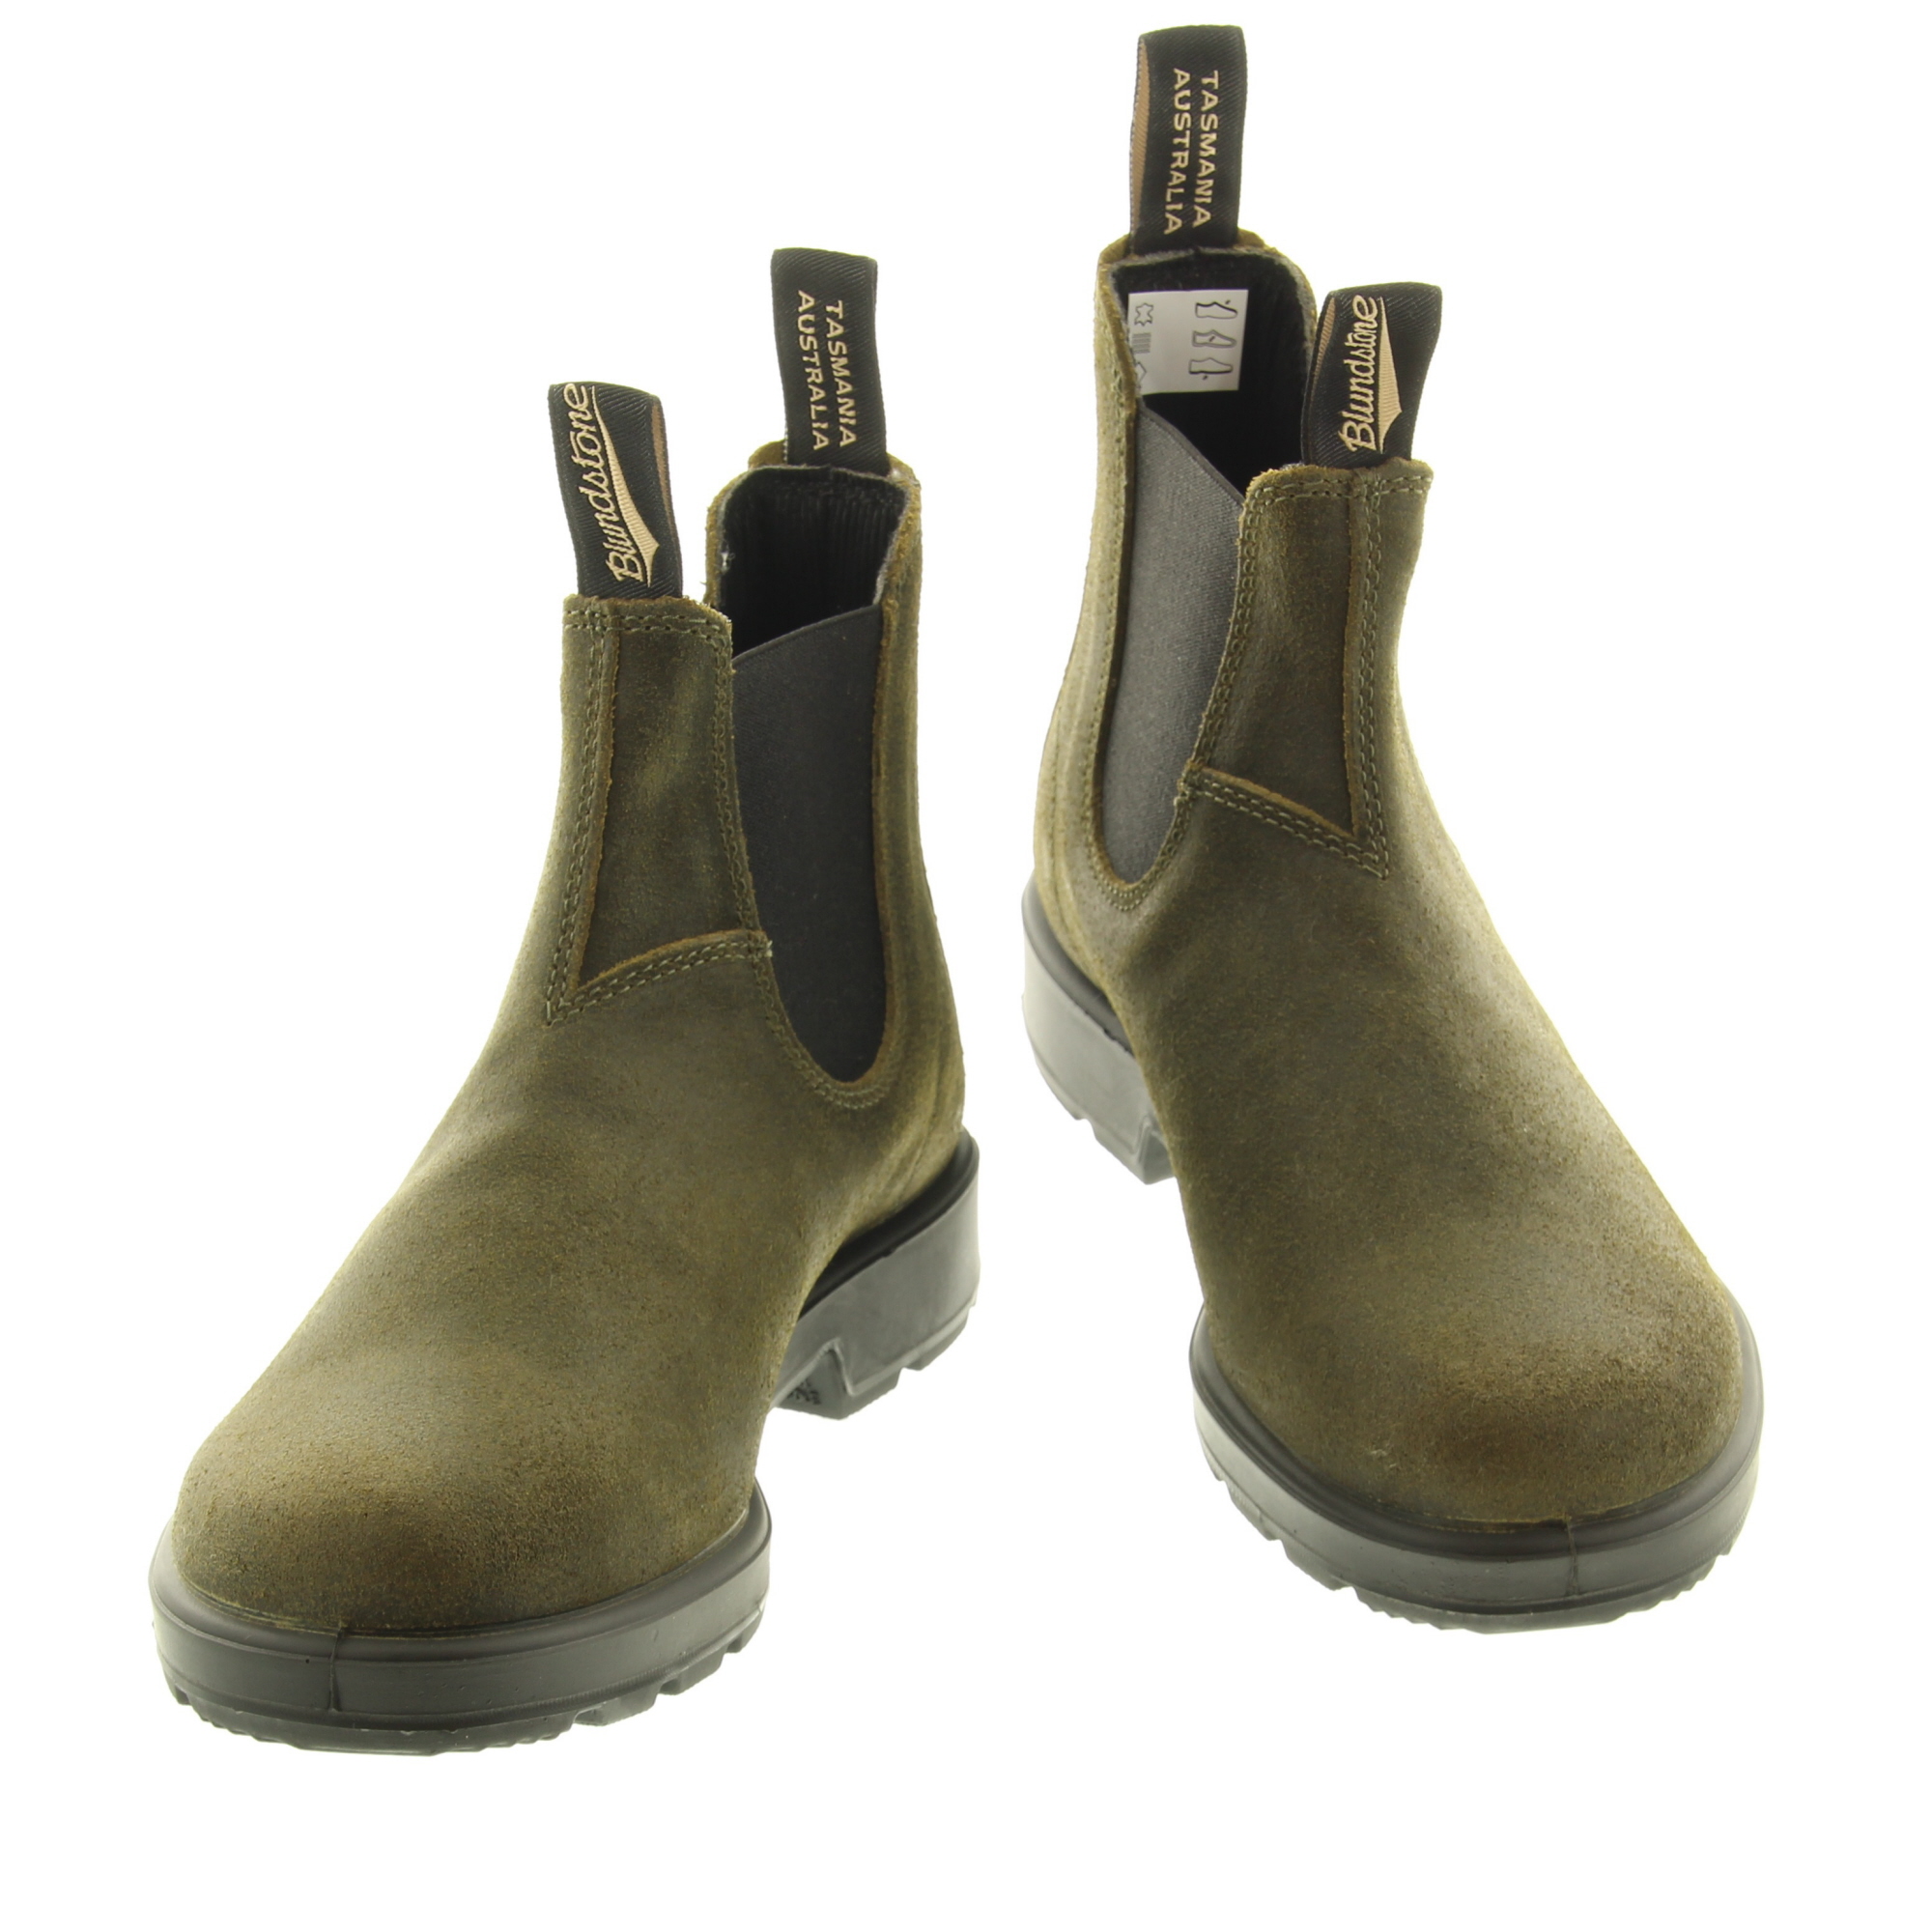 Blundstone 1615 Waxed Suede Olive